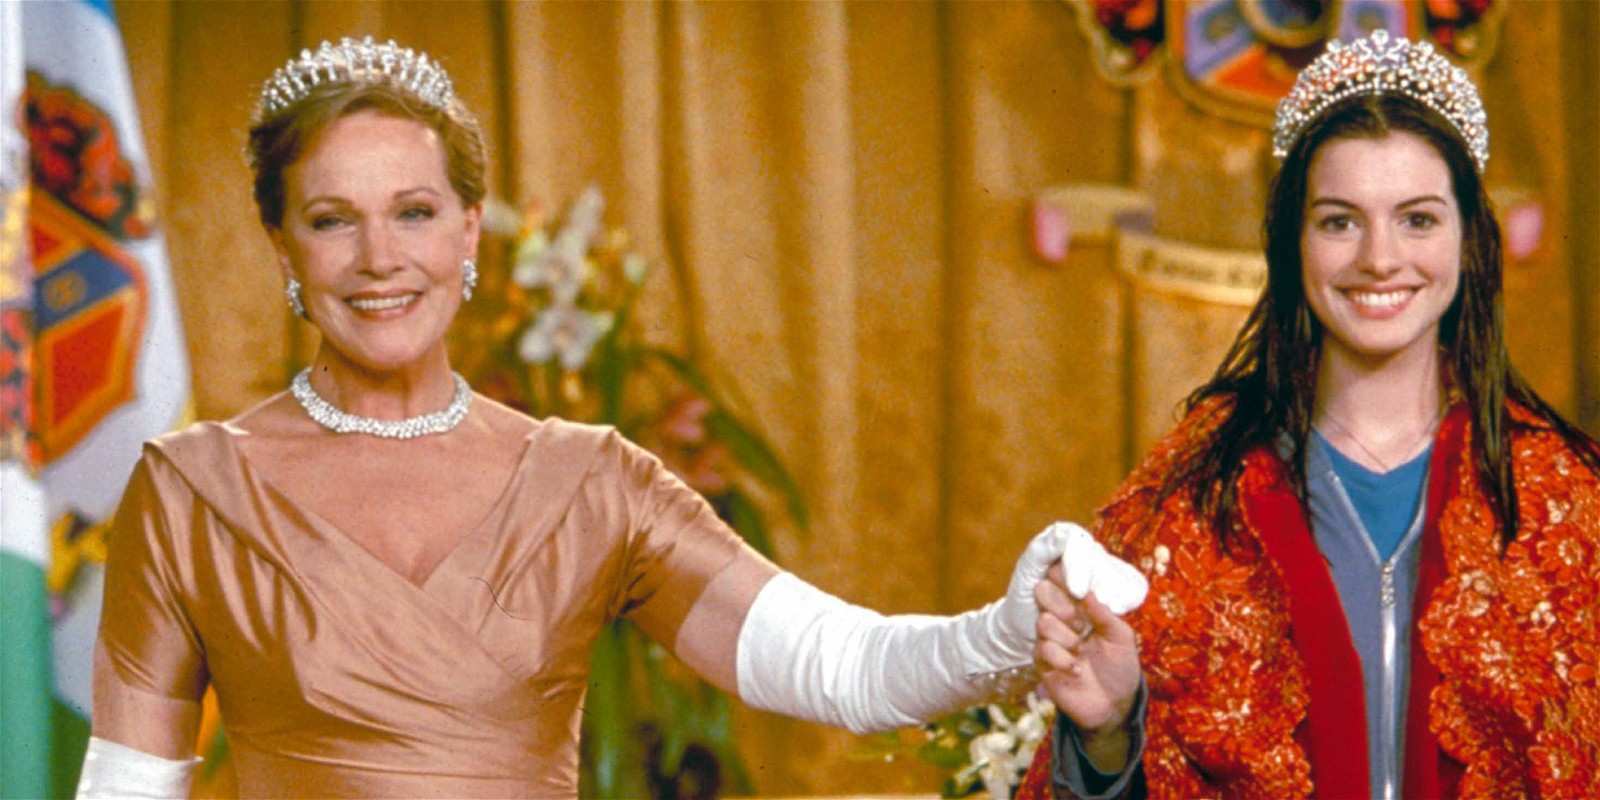 Julie Andrews and Anne Hathaway in The Princess Diaries franchise